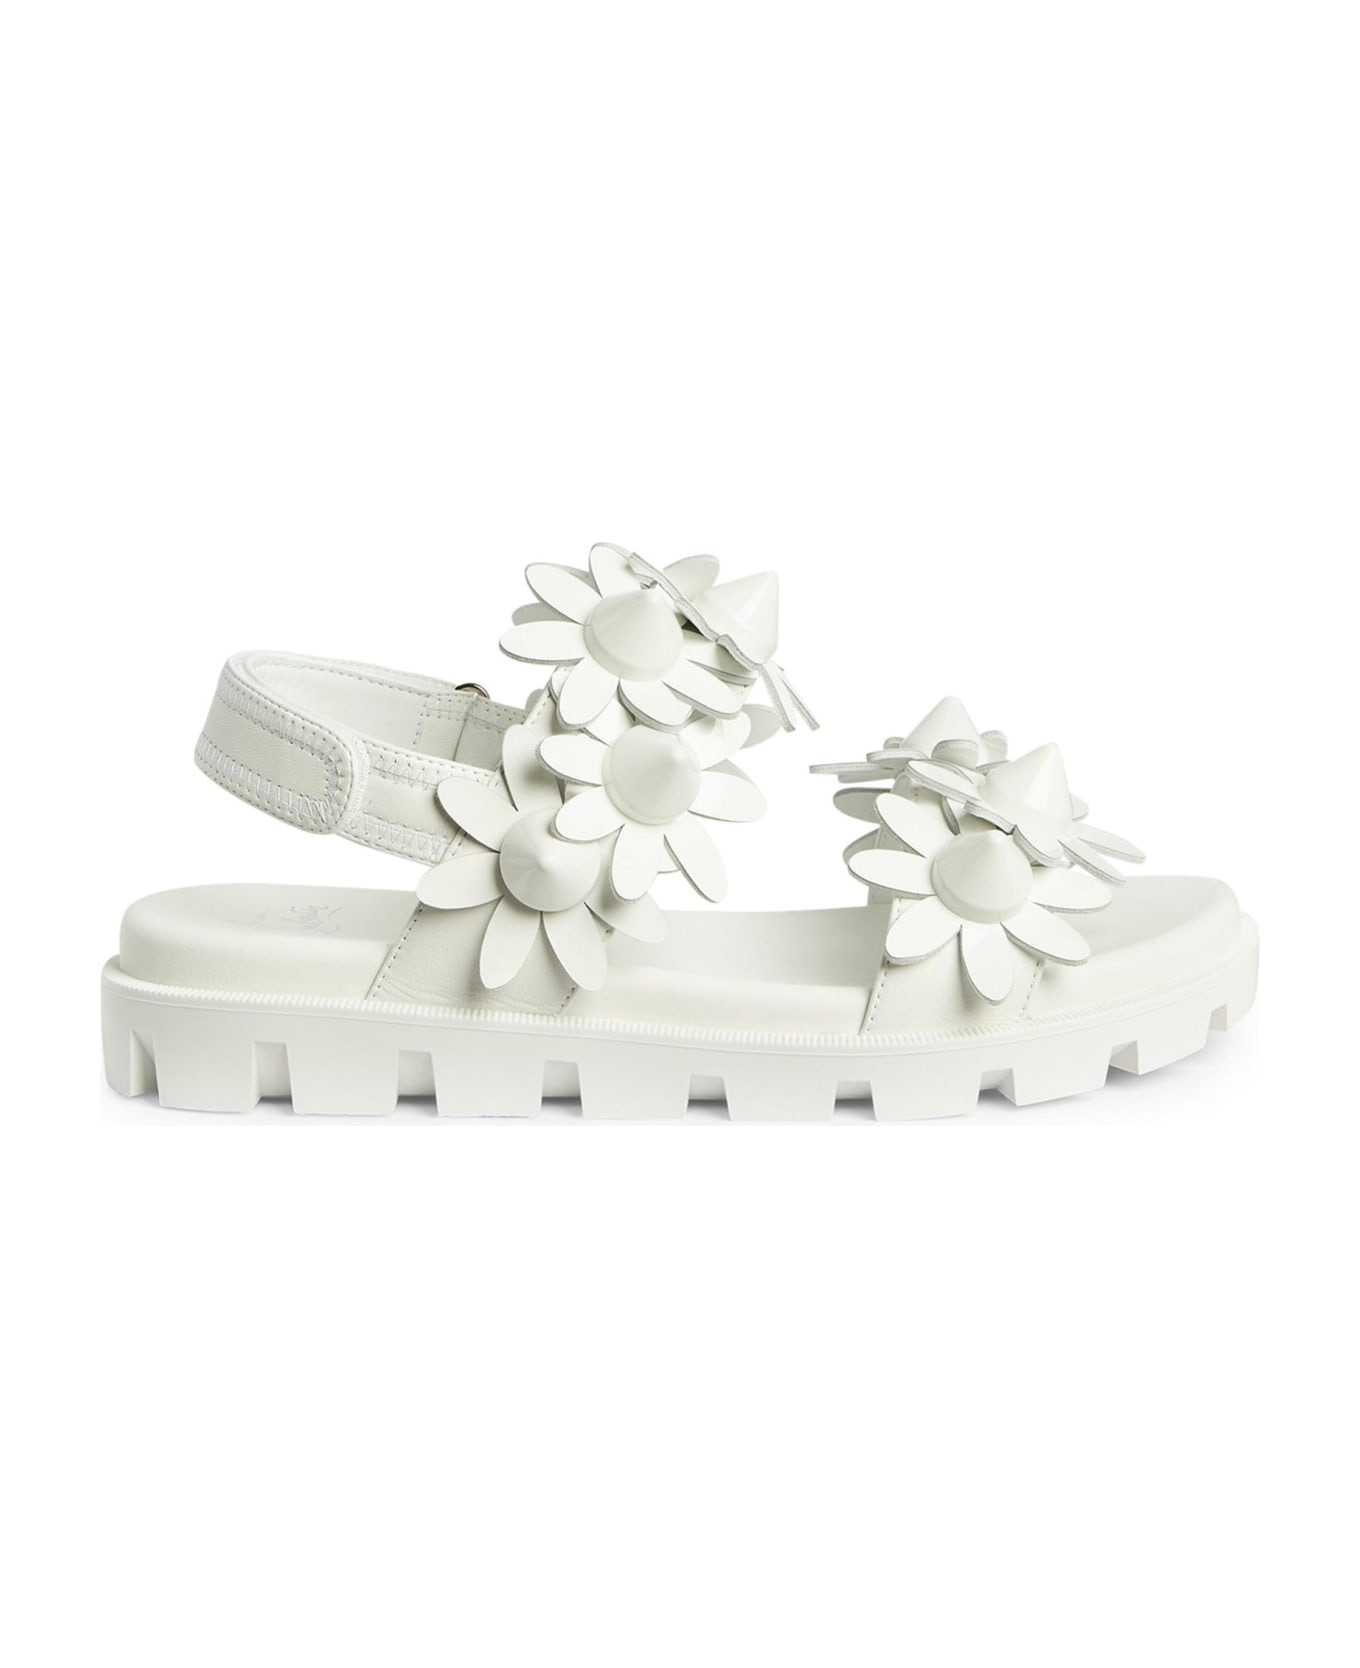 Christian Louboutin Daisy Spikes Cool Sandals - White